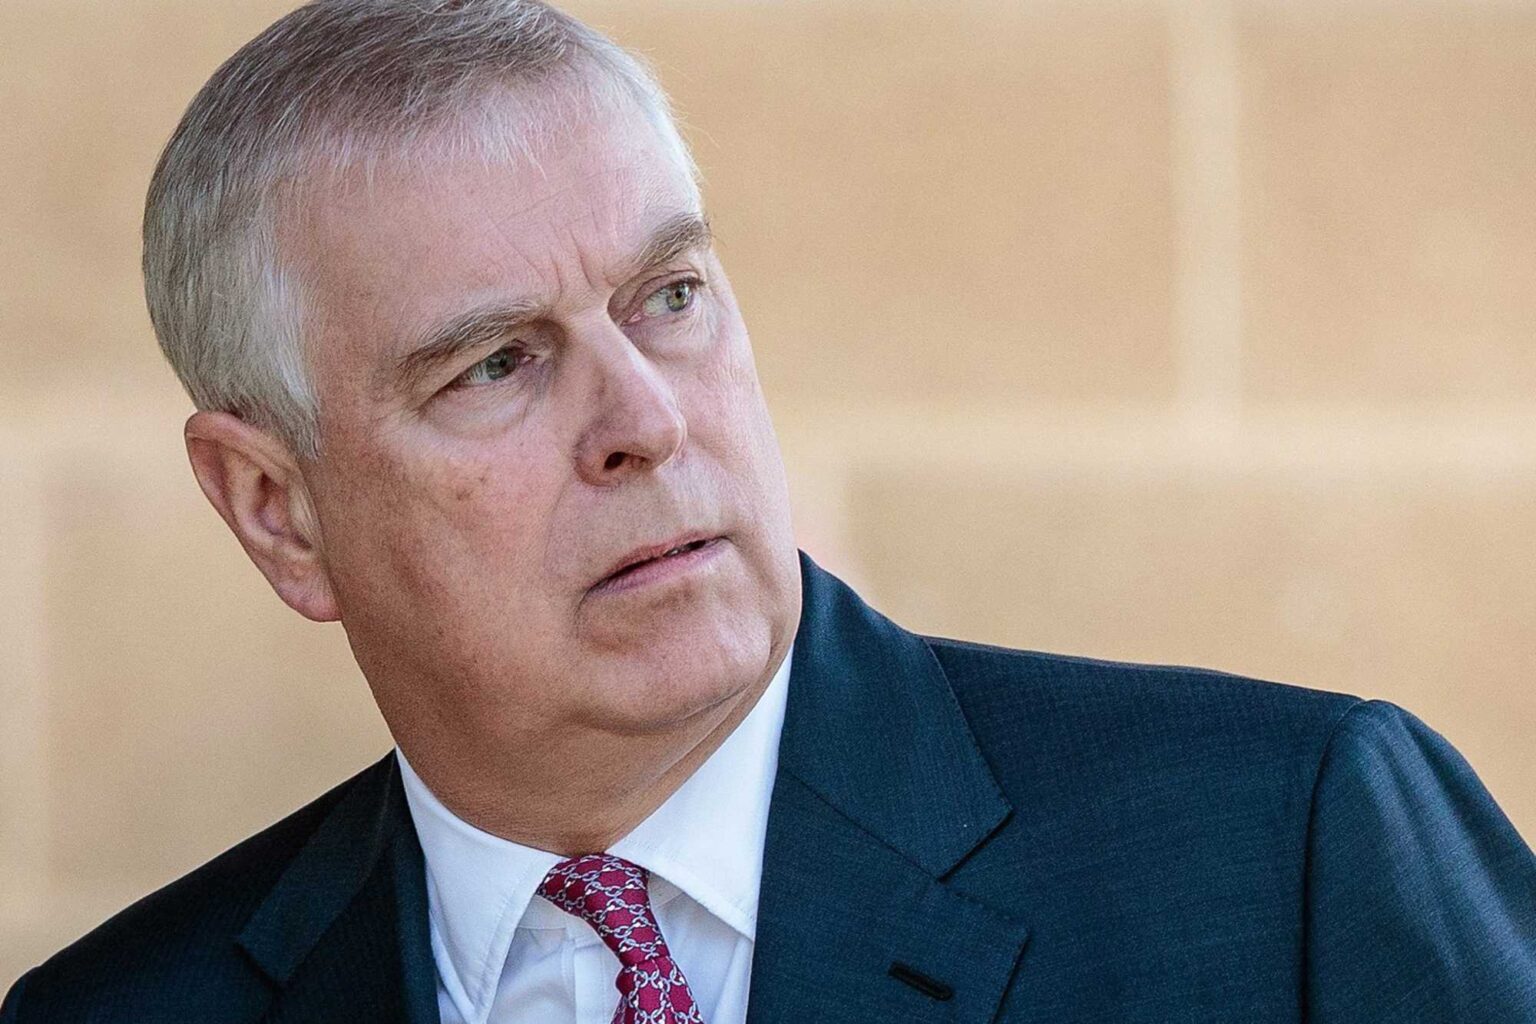 Prince Andrew has yet to talk to the FBI about his friendship with Jeffrey Epstein. Discover why the Duke of York is reluctant to speak up.